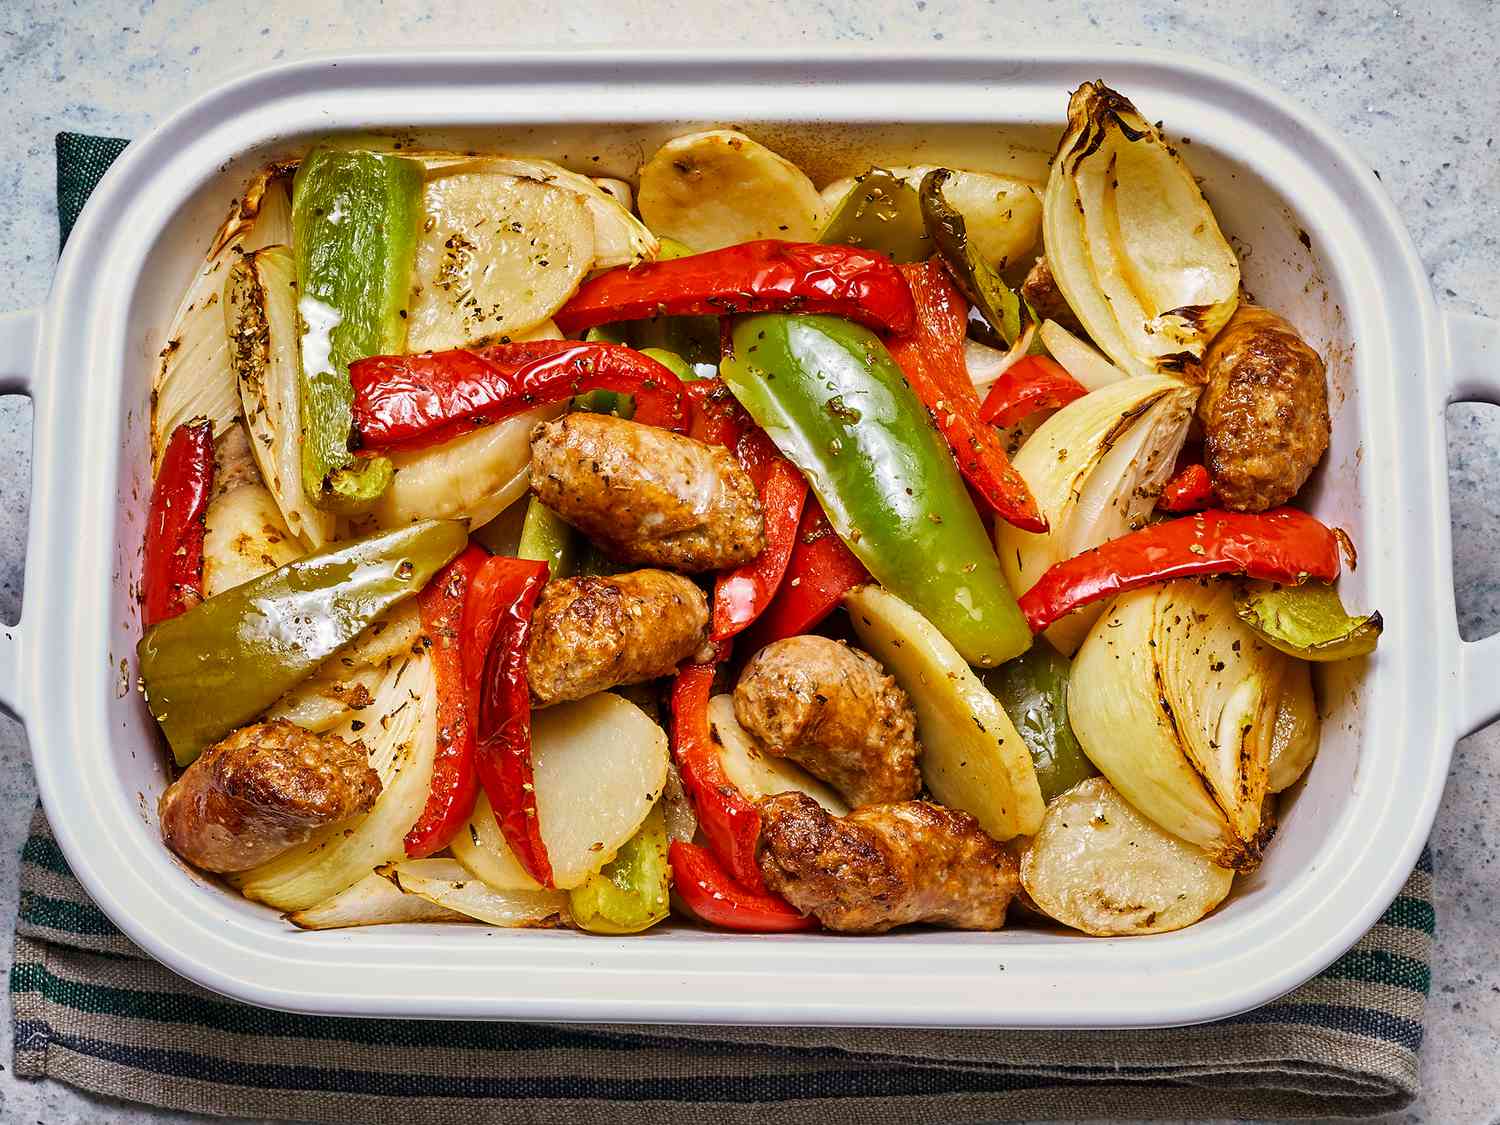 Overhead view of baked sausage, peppers, onions, and potatoes in a white baking dish.